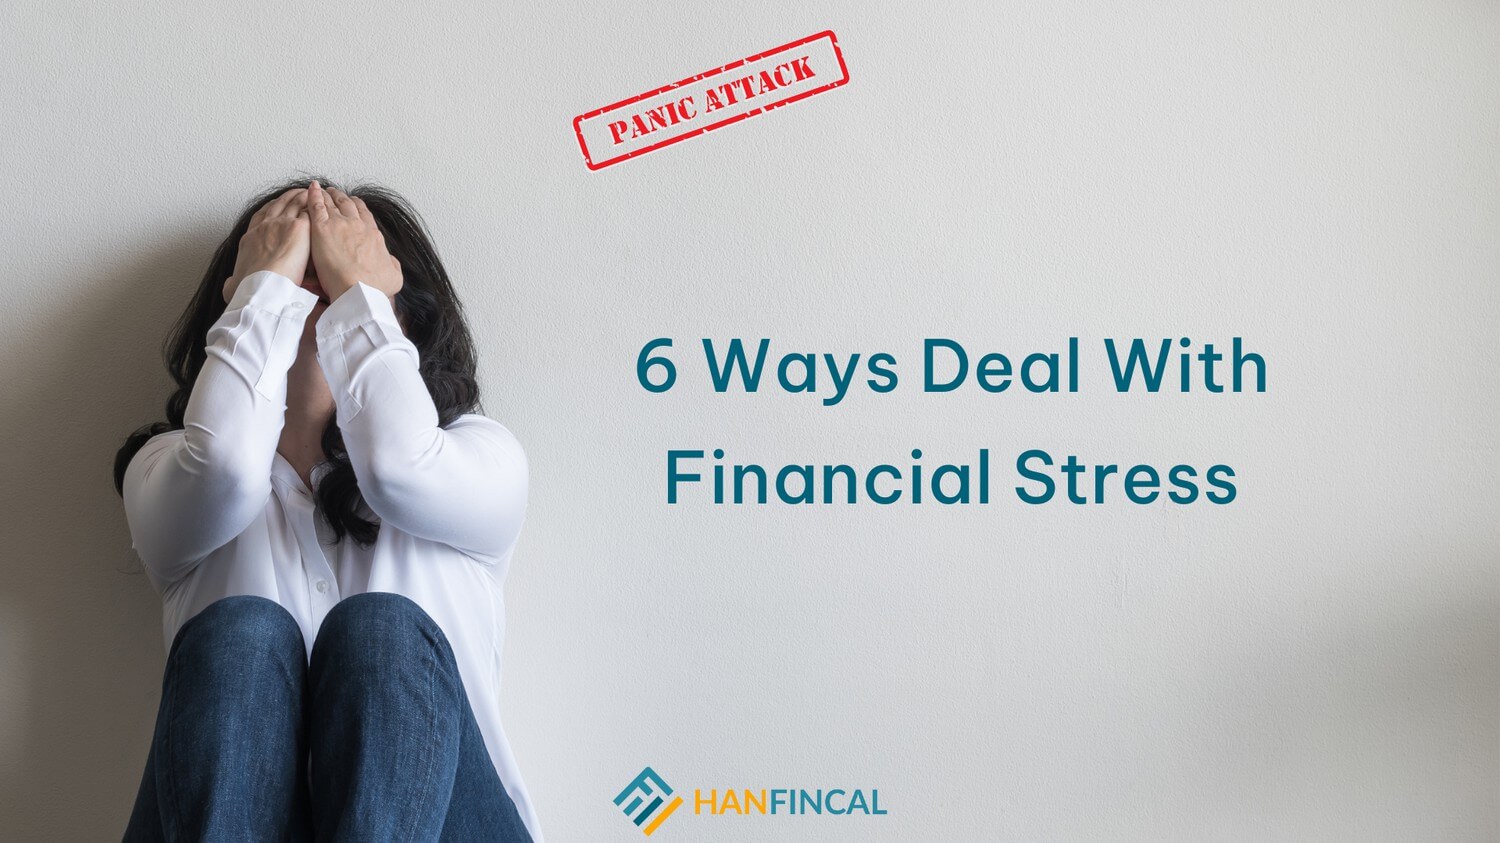 6 Ways To Deal With Financial Stress